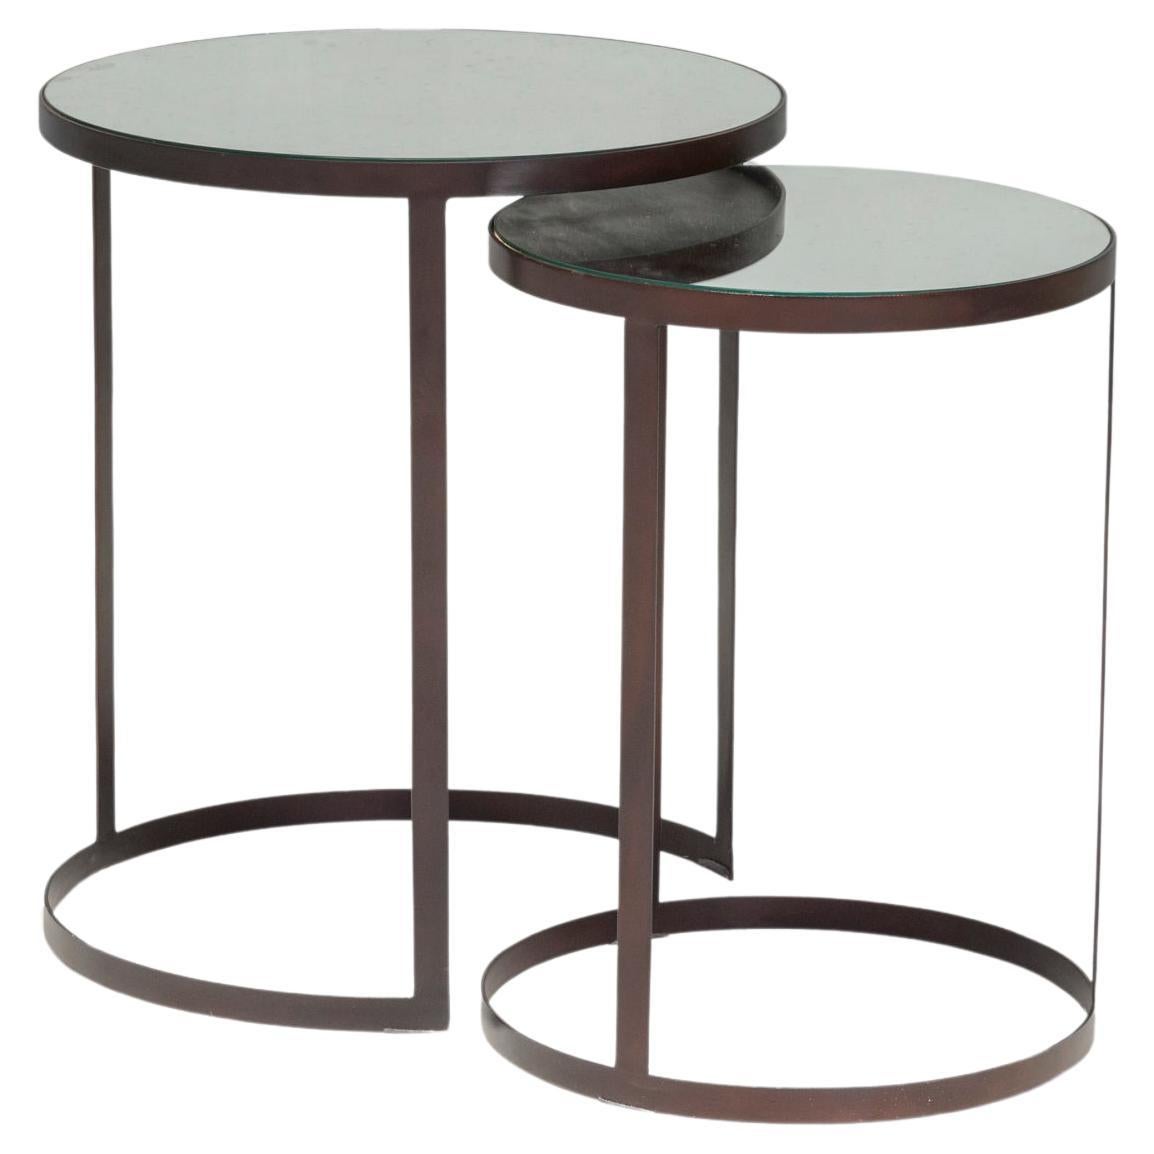 Liang & Eimil Nesting Glass Nesting Side Tables In Antique Bronze, Set of 2 